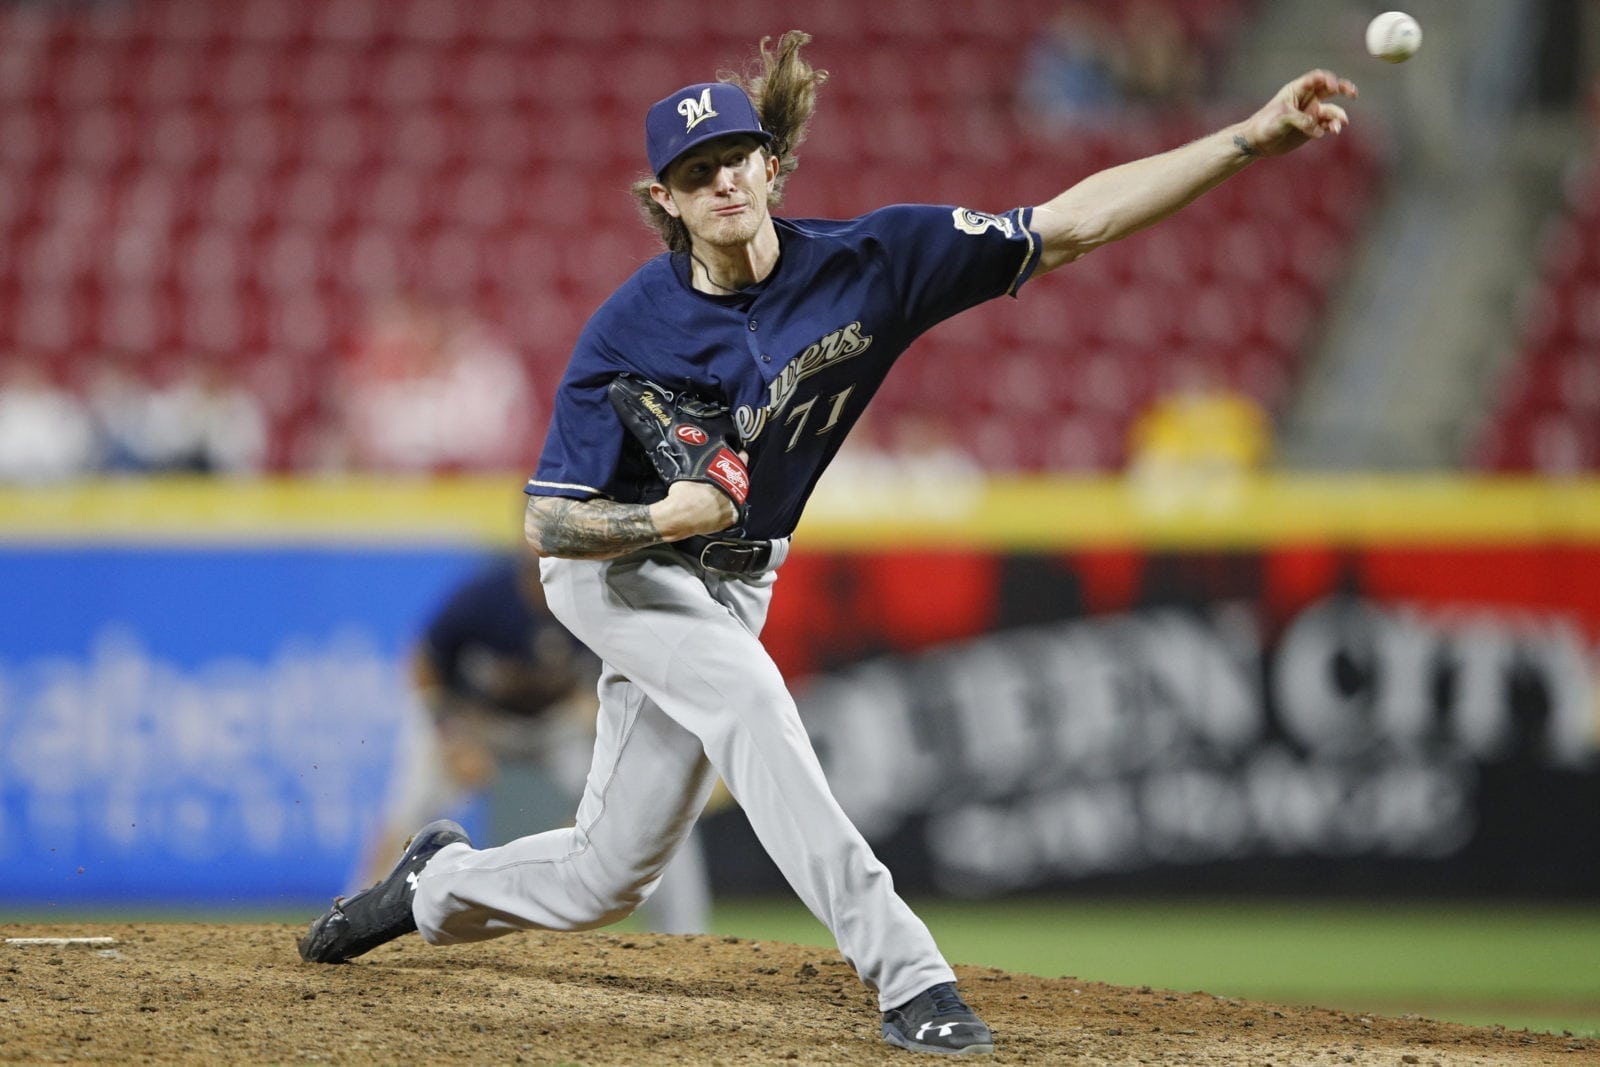 Brewers All-Star Josh Hader Was Exposed as a Teen Racist. What Happens Now?